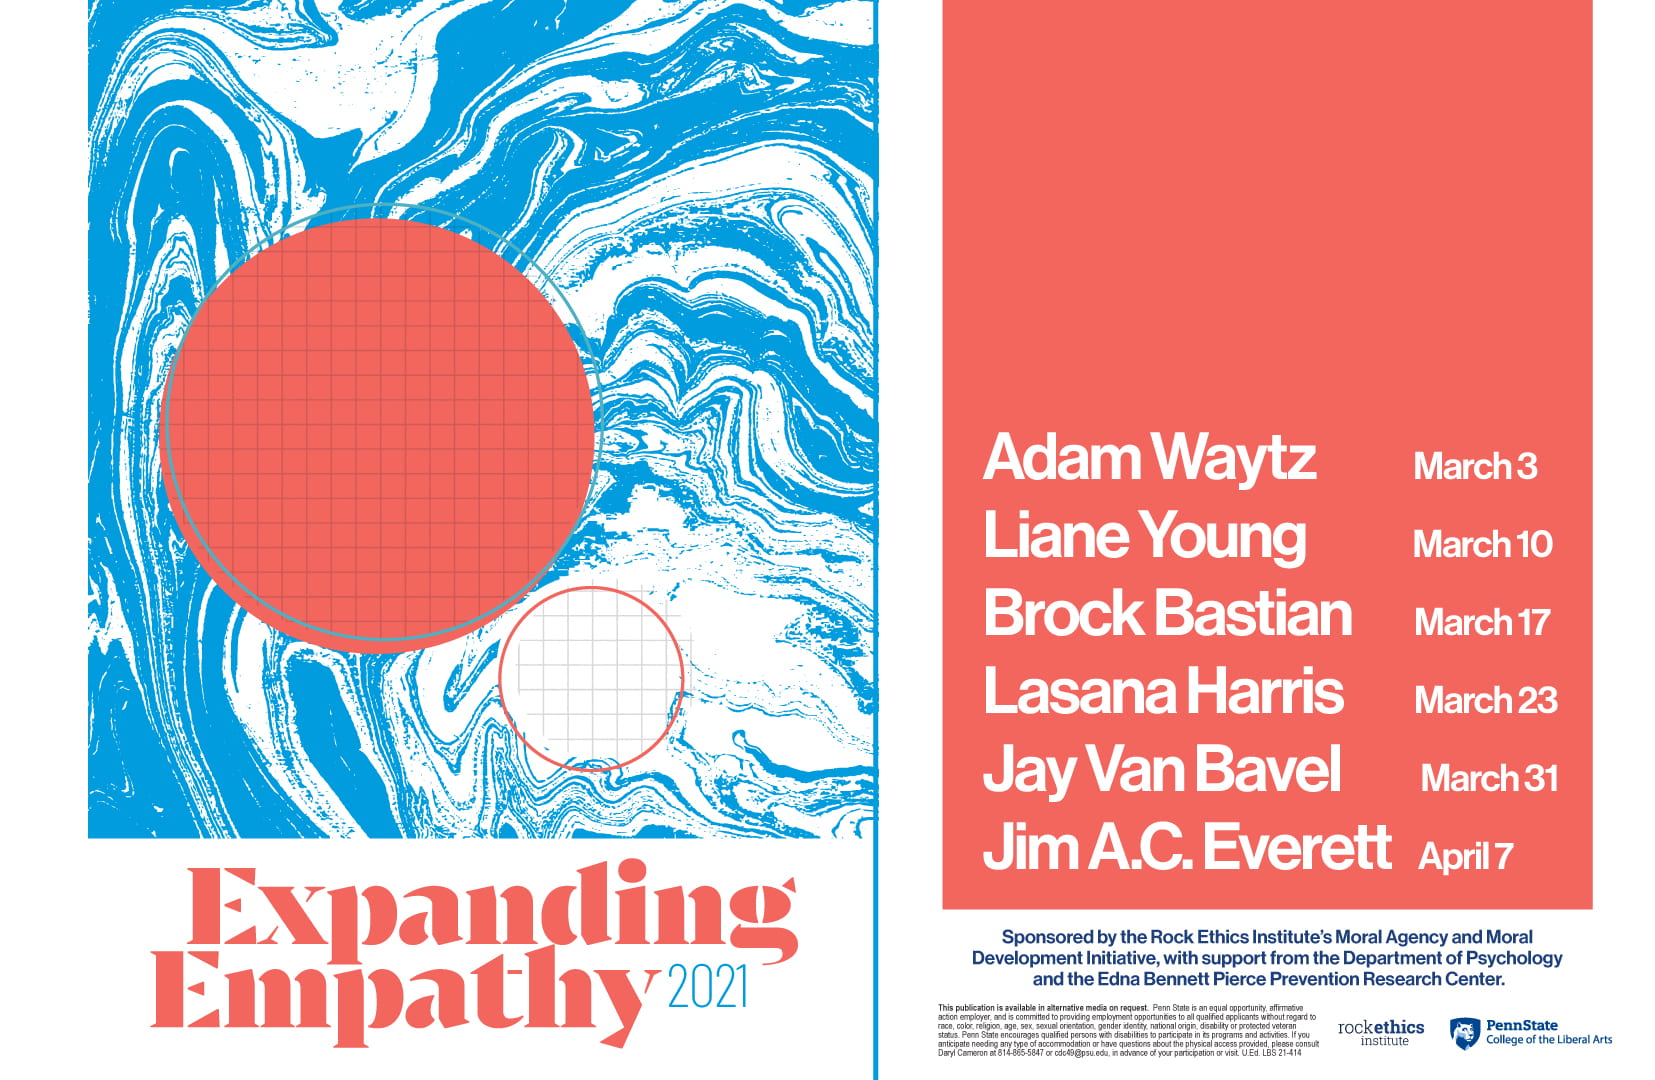 Expanding Empathy Speakers 2020 including Jesse Graham, Paul Conway, David Desteno and Abigail Marsh 